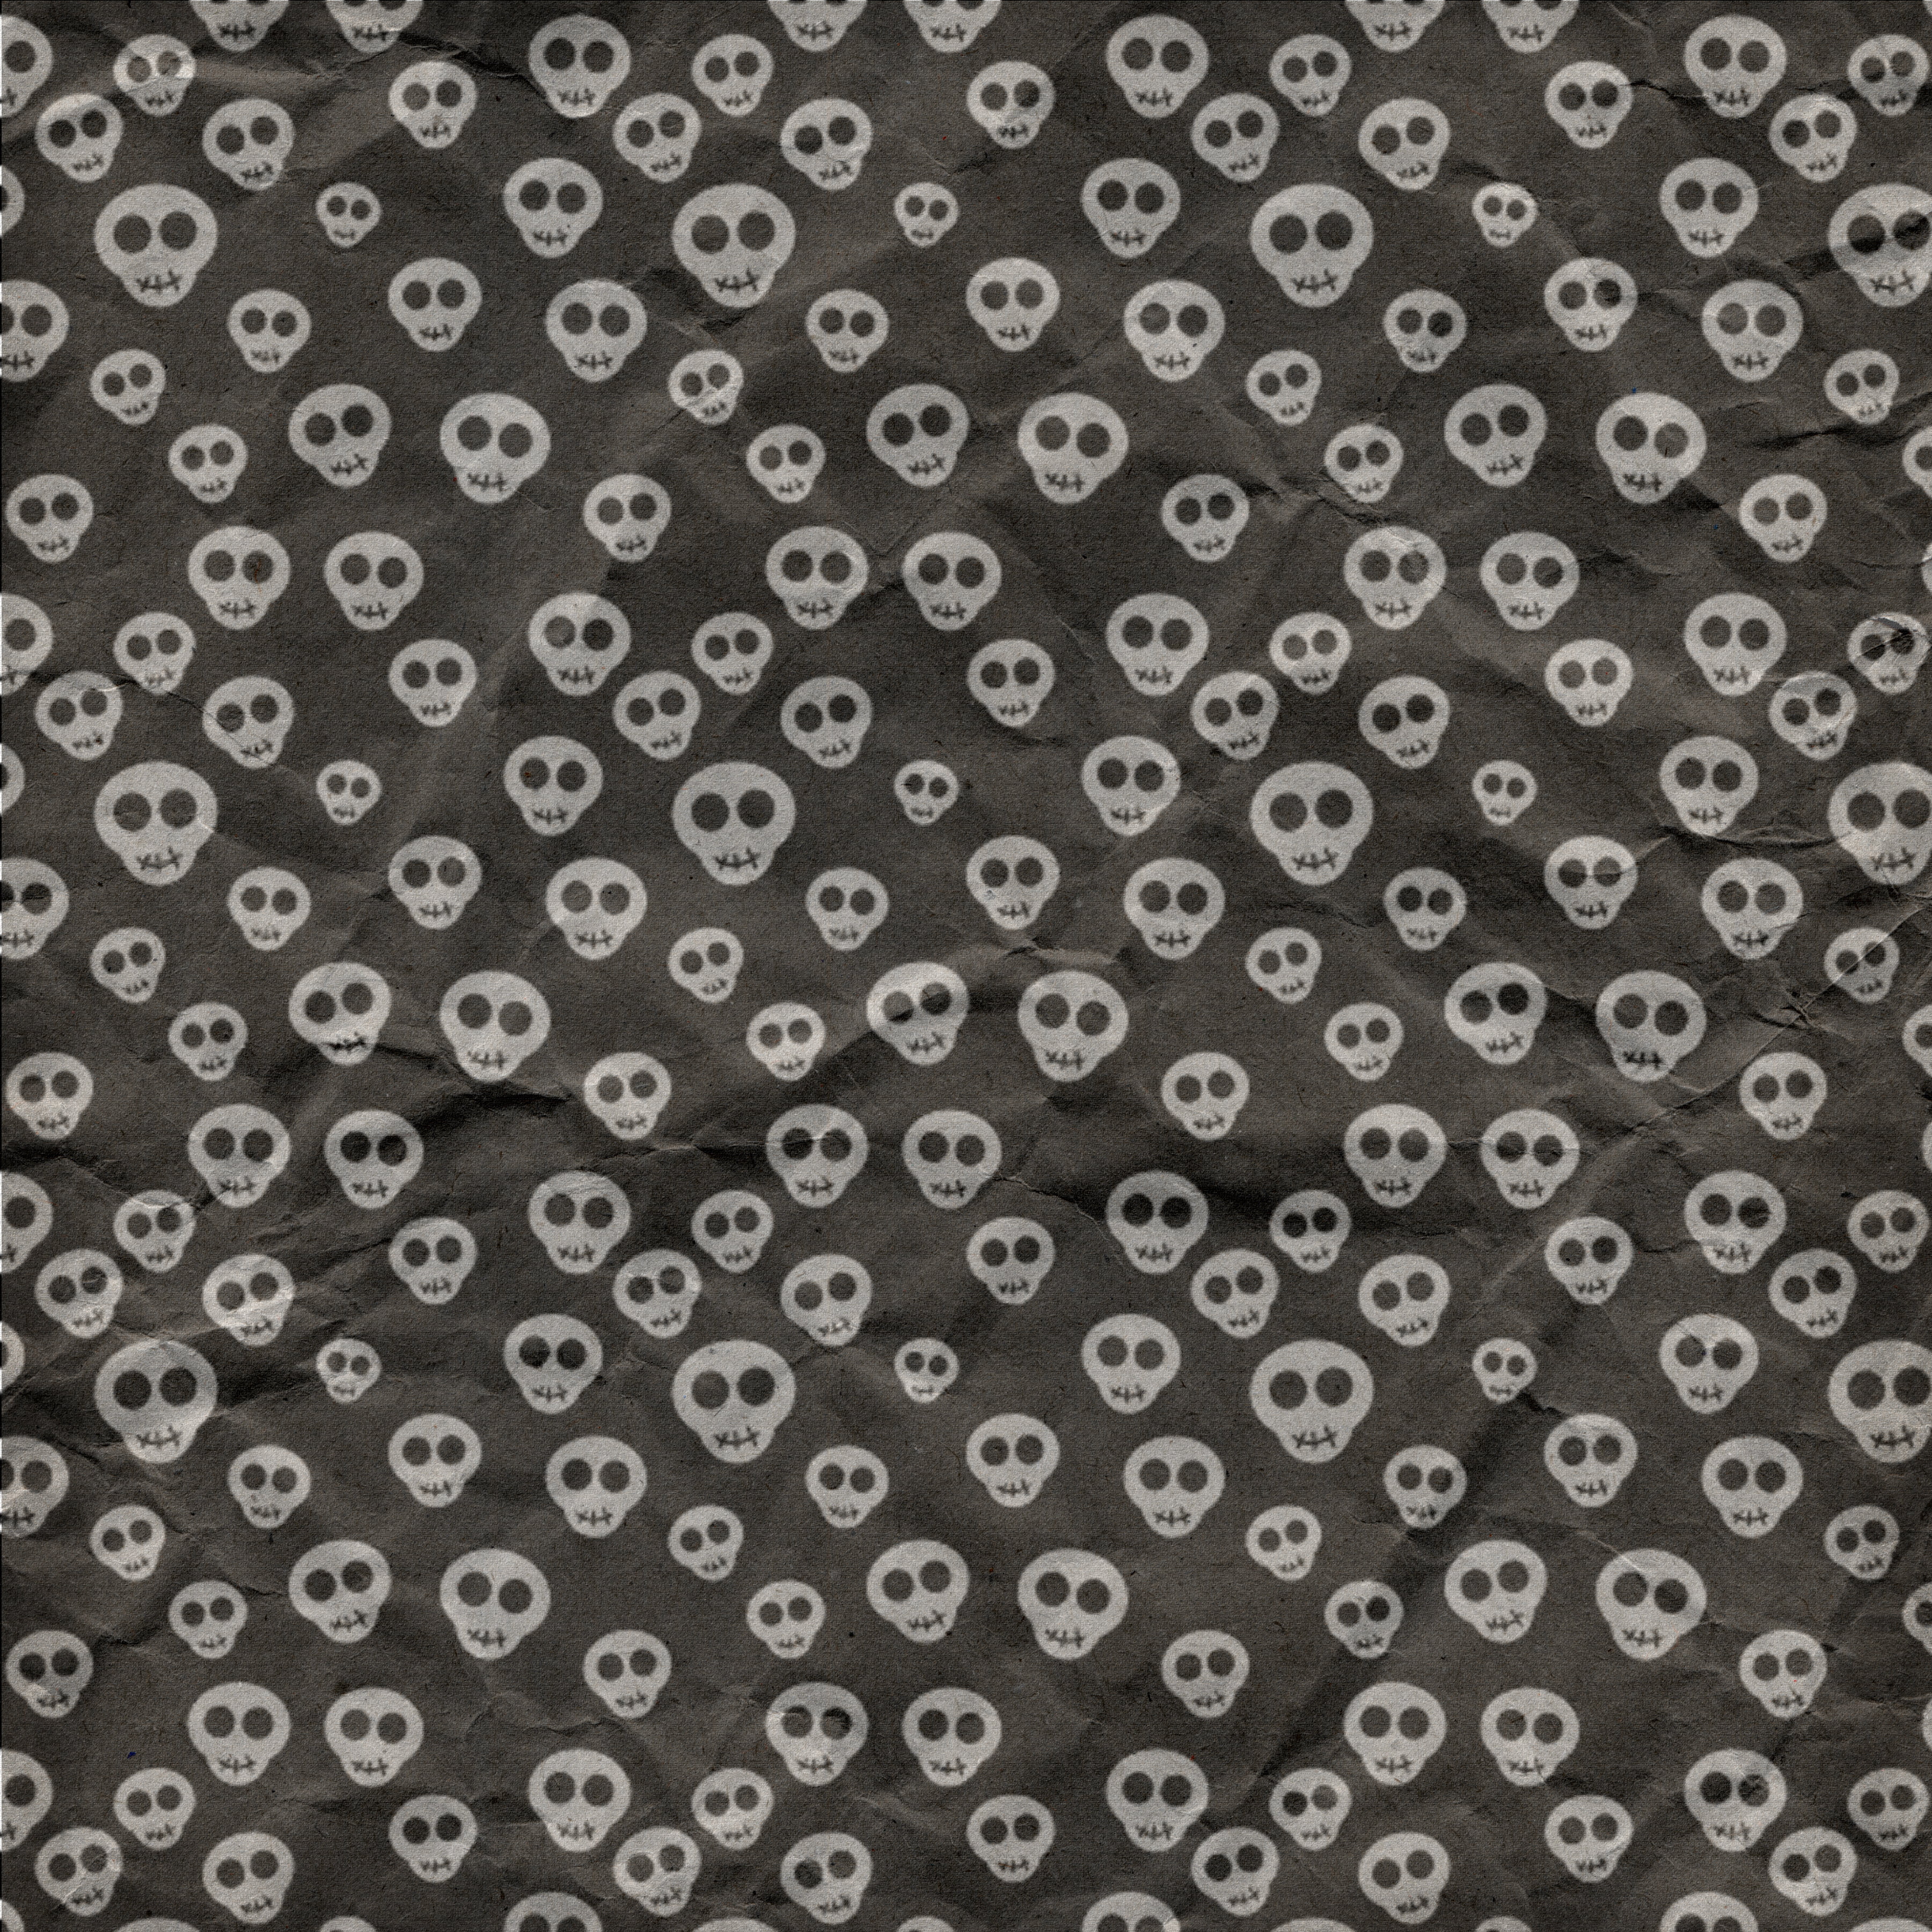 gray and white skull print paper, background, texture, Halloween